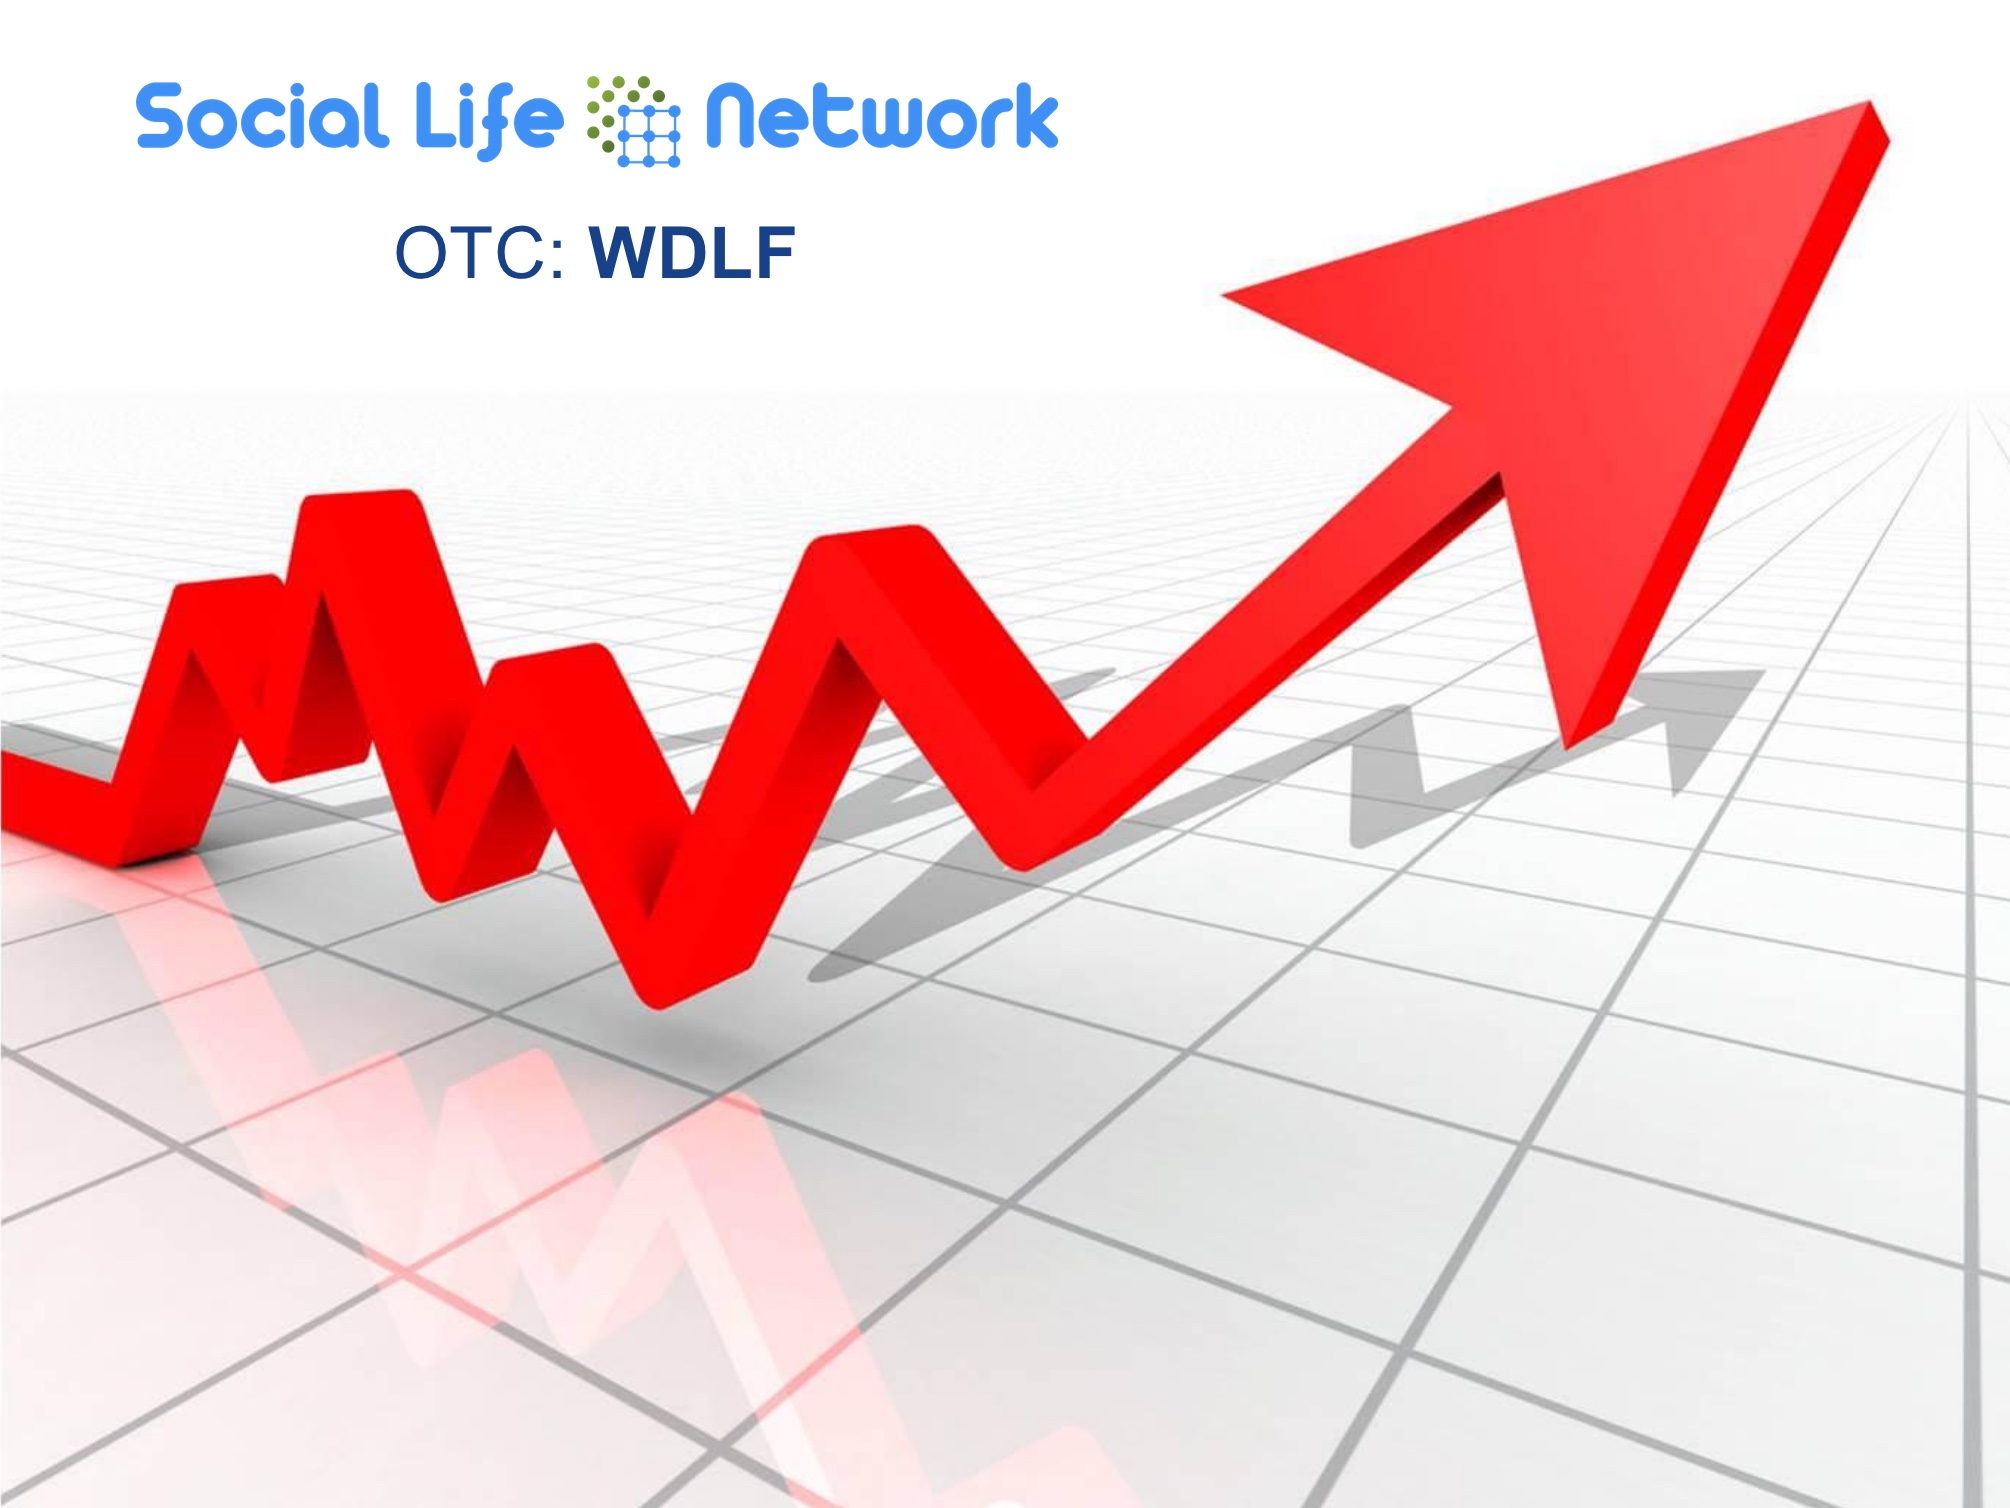 Social Life Network to Host March 31, 2020 Shareholder Call for 10-K and Q1 News Updates